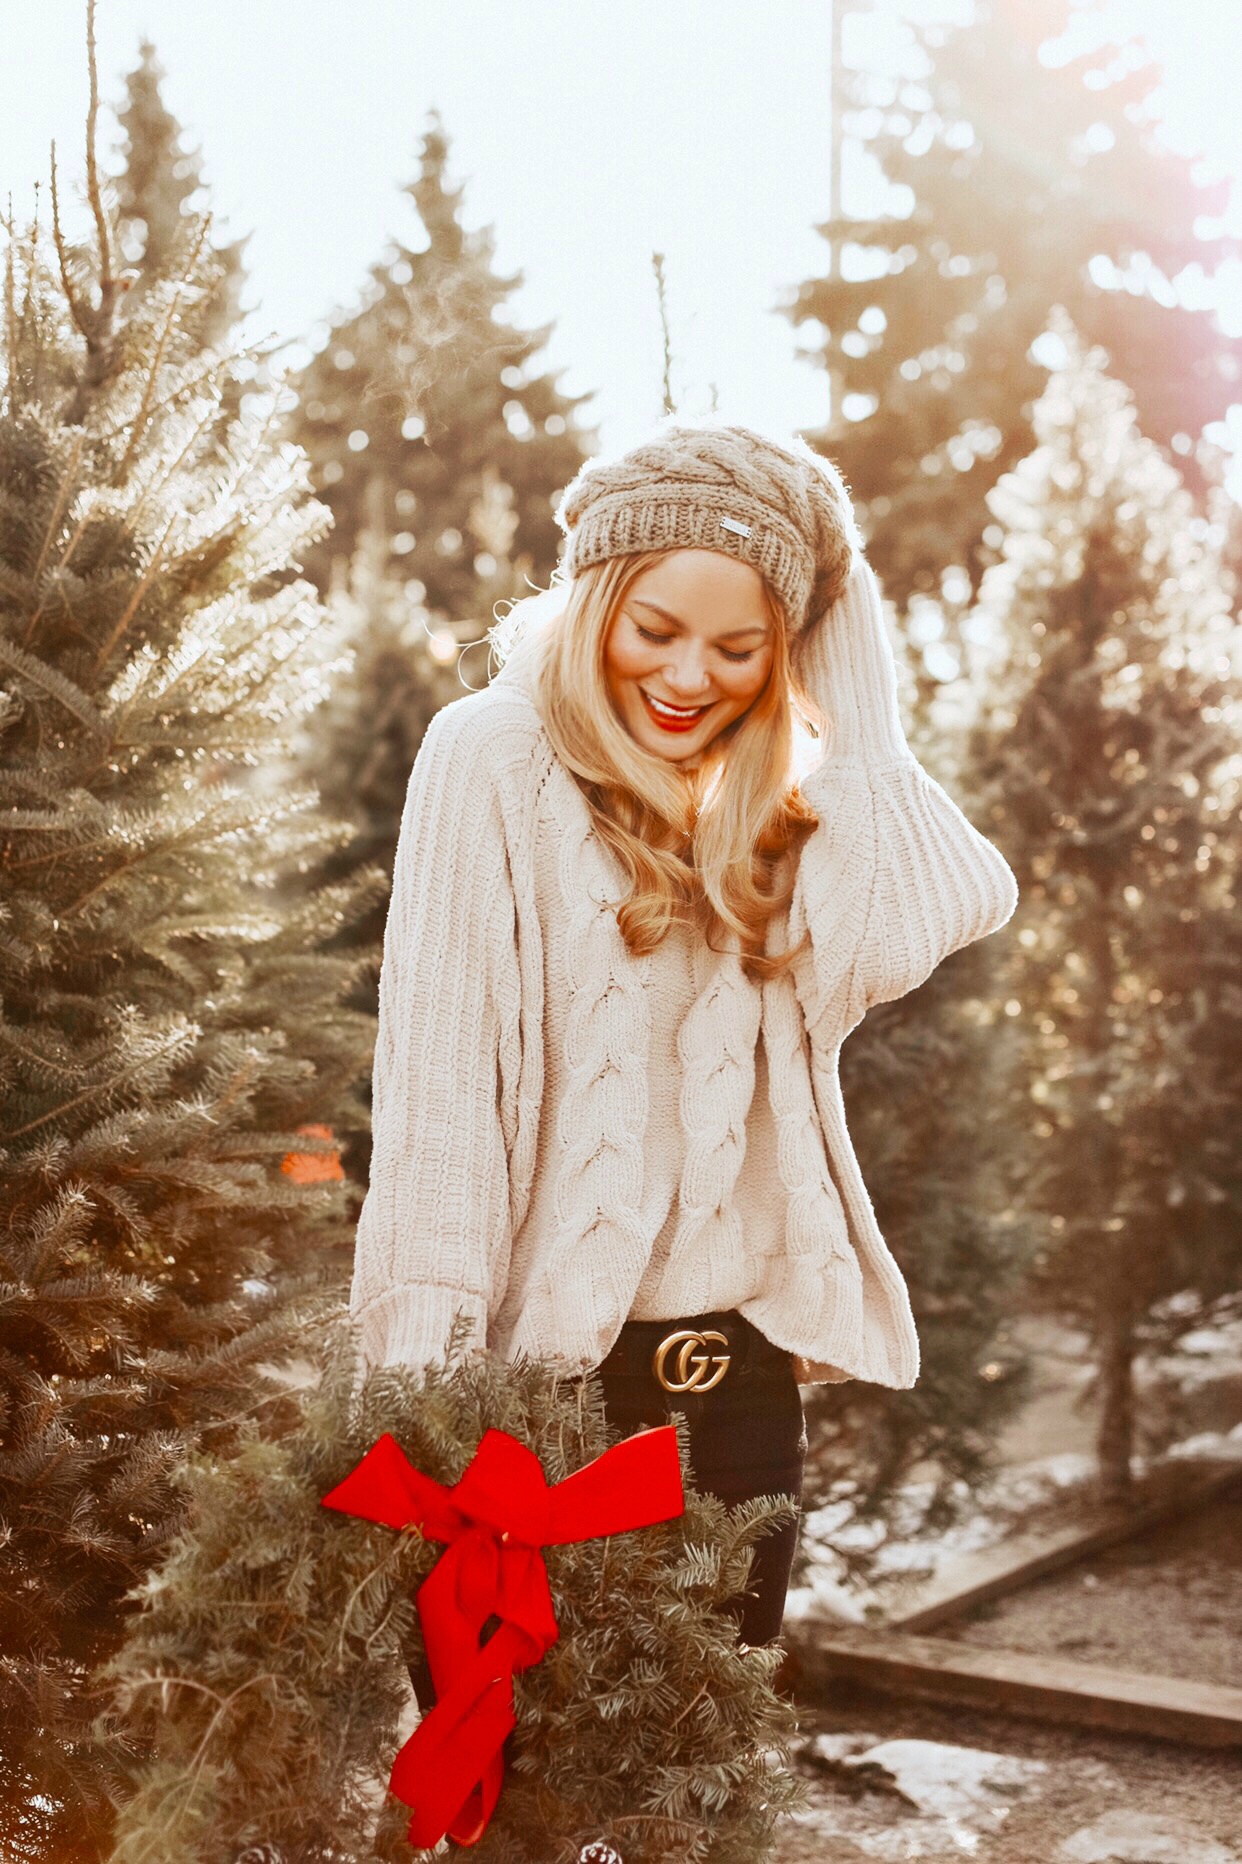 Holiday-Cheer-Christmas-Wreath-Vanessa-Lambert-famous-influencer-What-Would-V-Wear